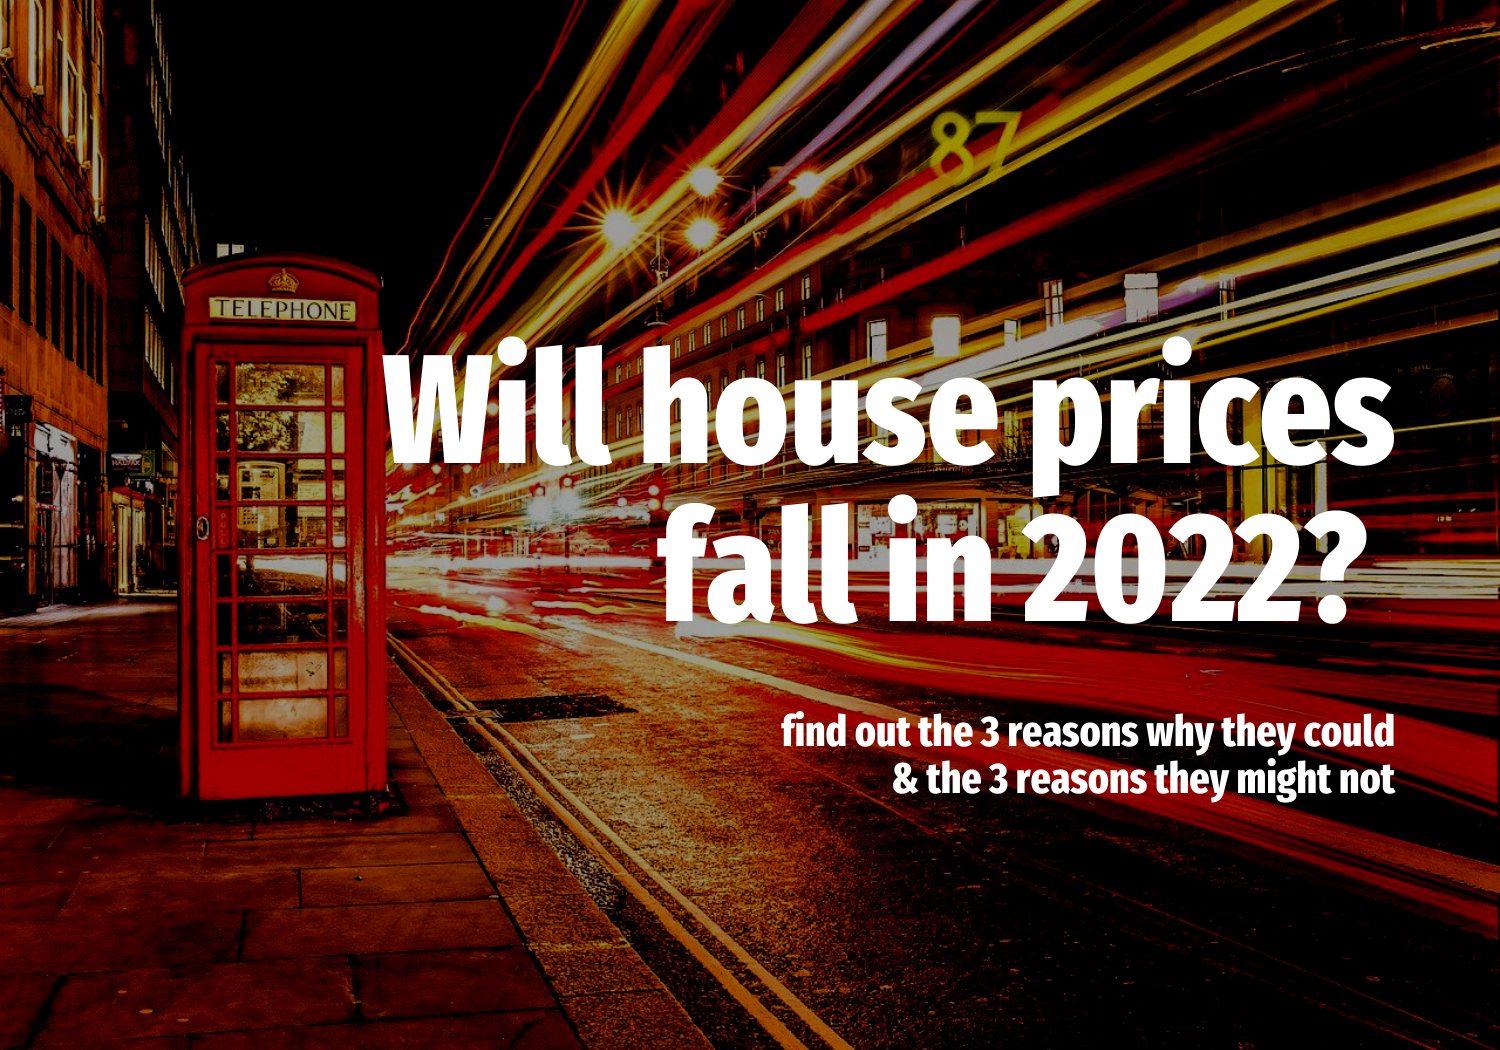 Will Harrow House Prices Fall In 2022?